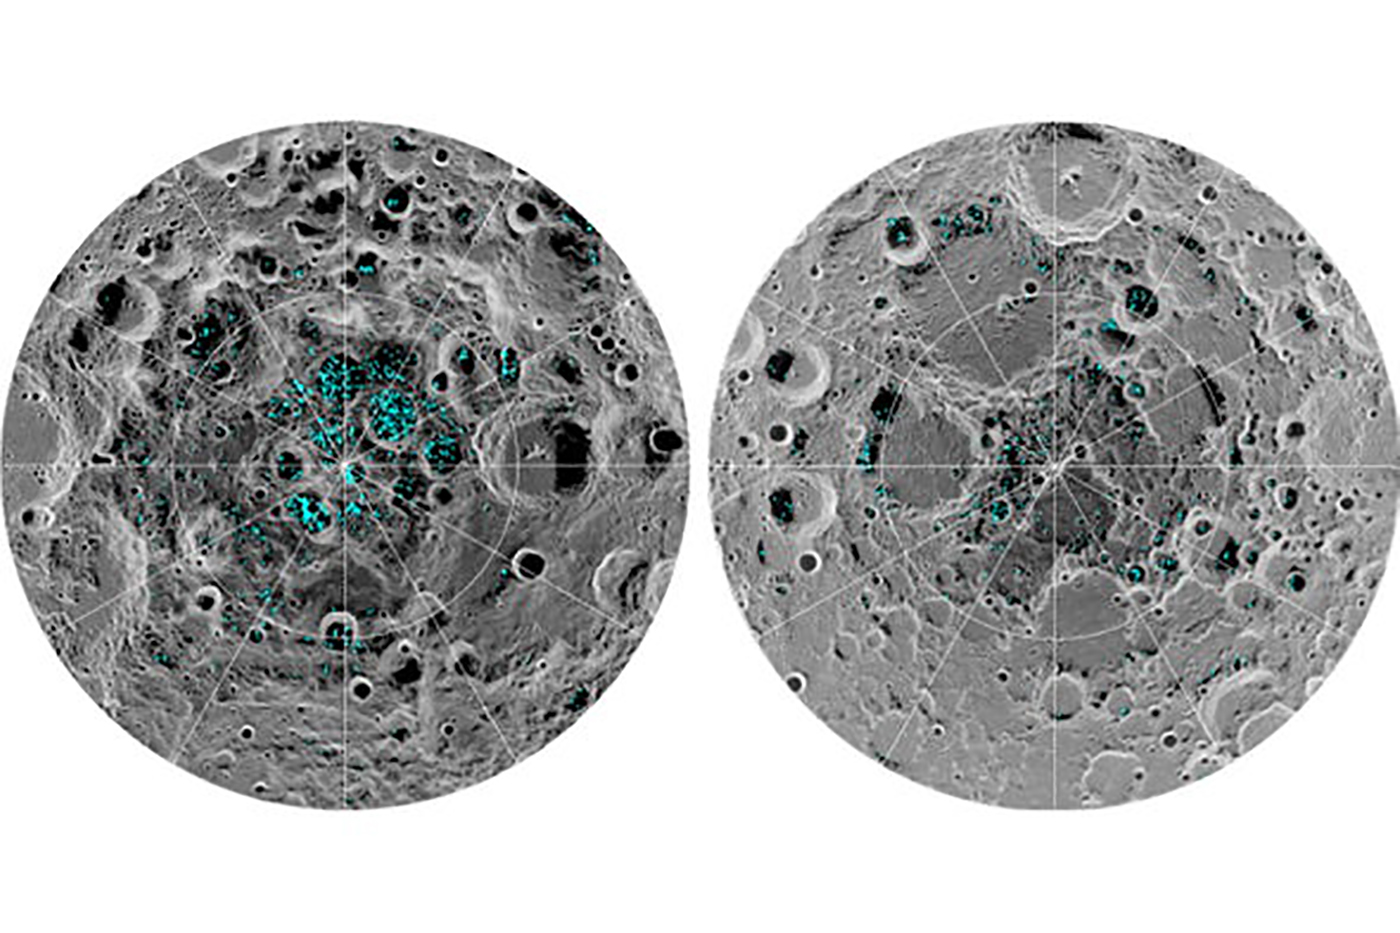 South Pole and North Pole of the moon.